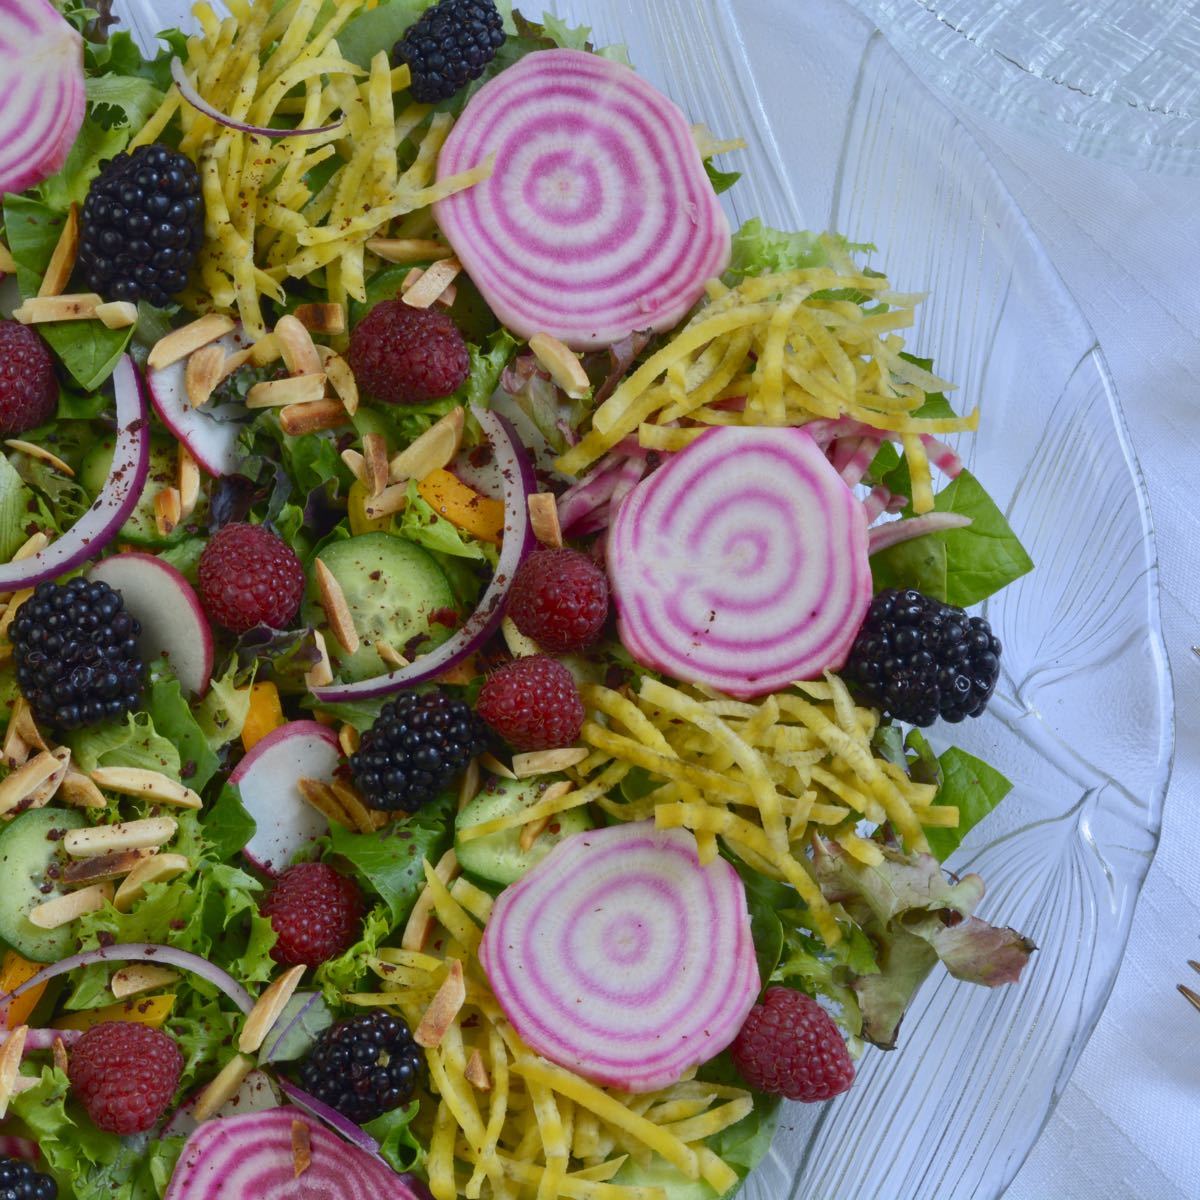 A glass bowl with Garden Harvest Jewelled Salad containing sliced candy cane beets, grated golden beets, raspberries, blackberries and a variety of lettuce.